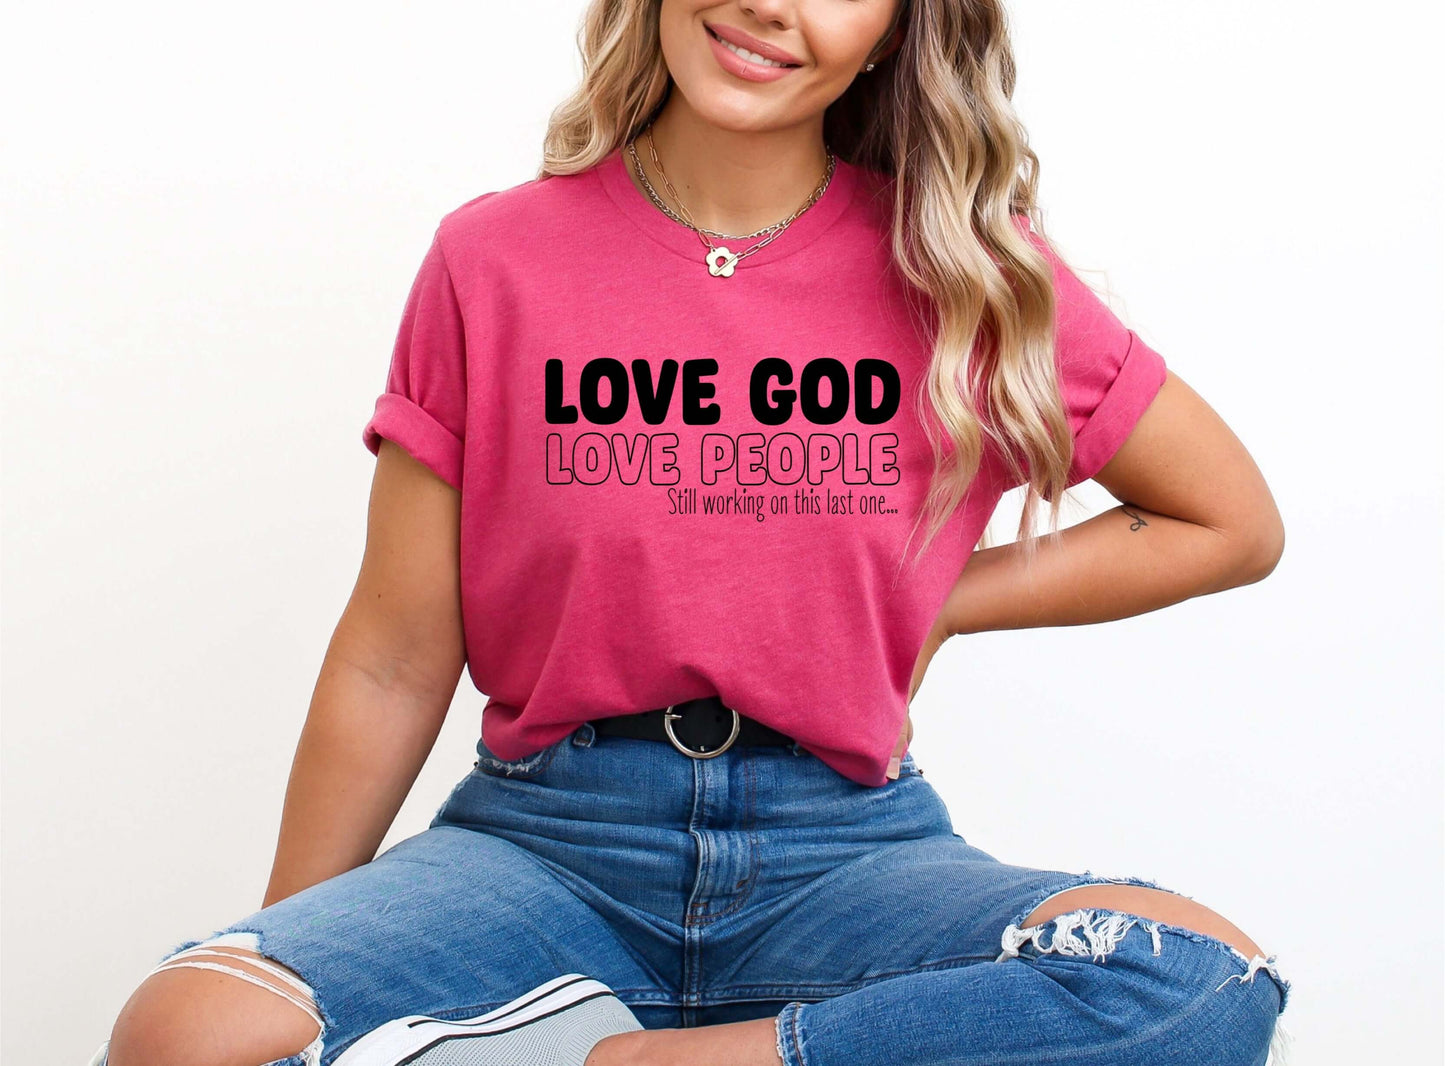 Love God Love People (still working on the last one) Ladies T-Shirt